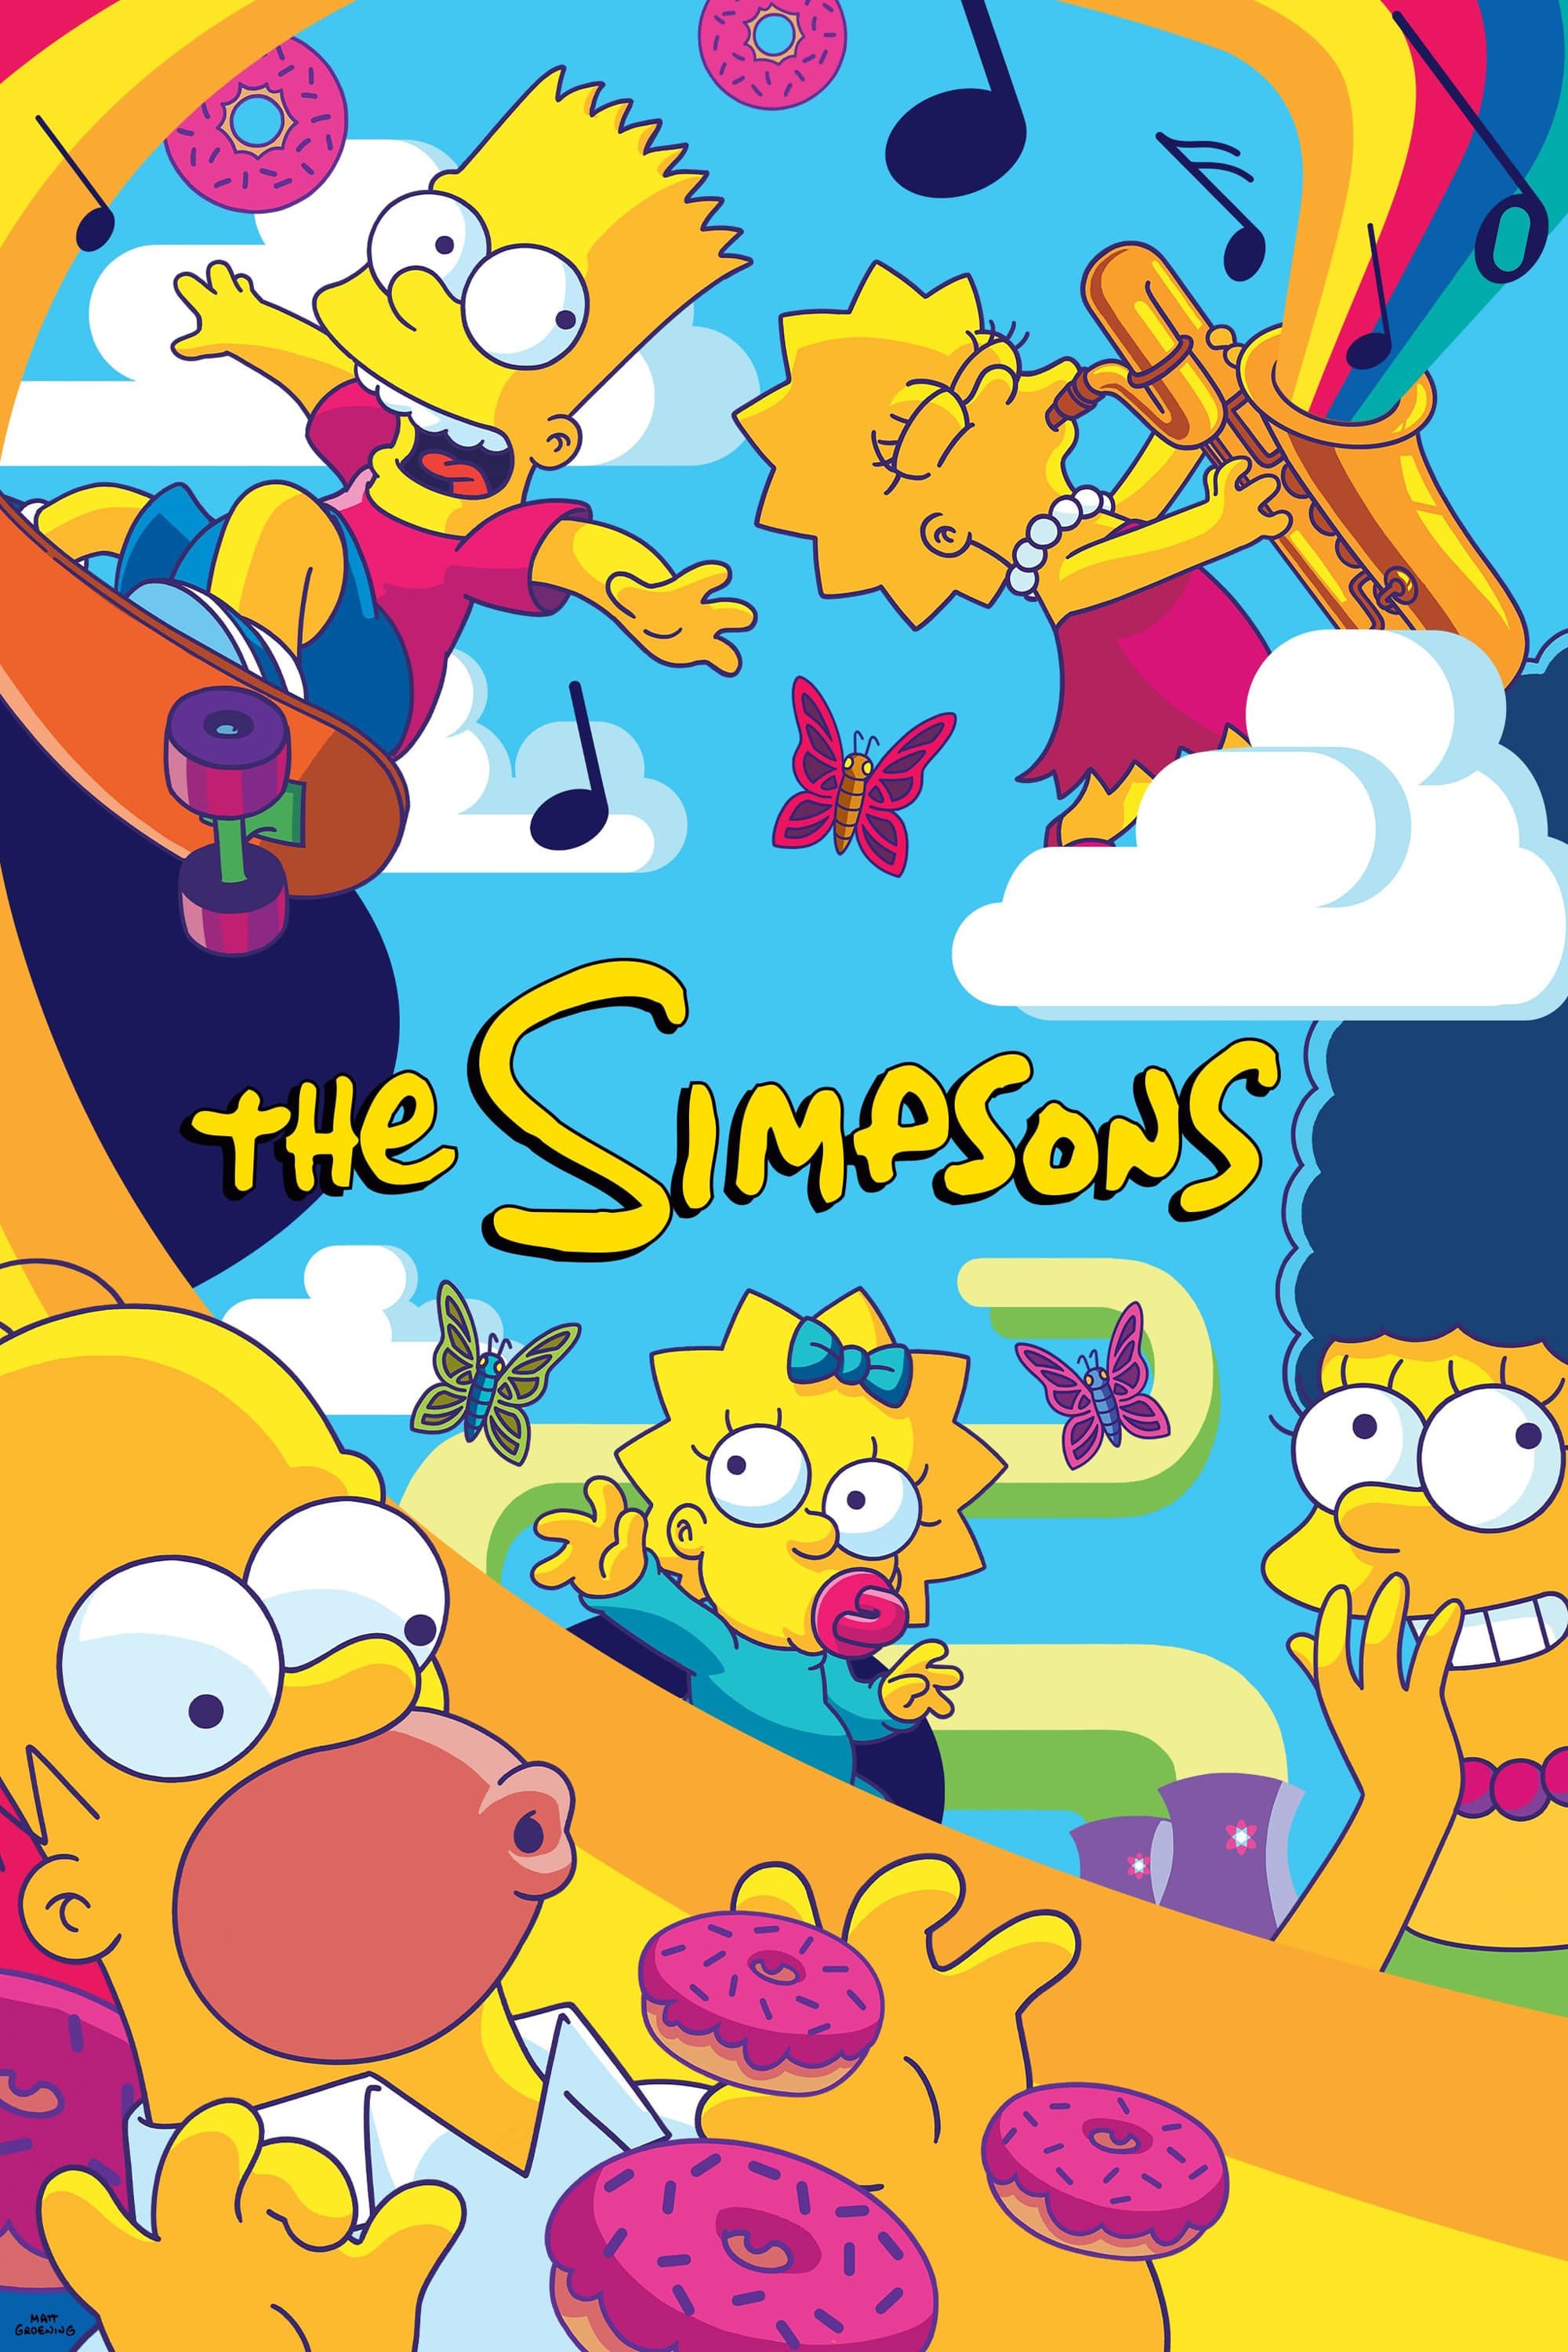 Os Simpsons (1989)